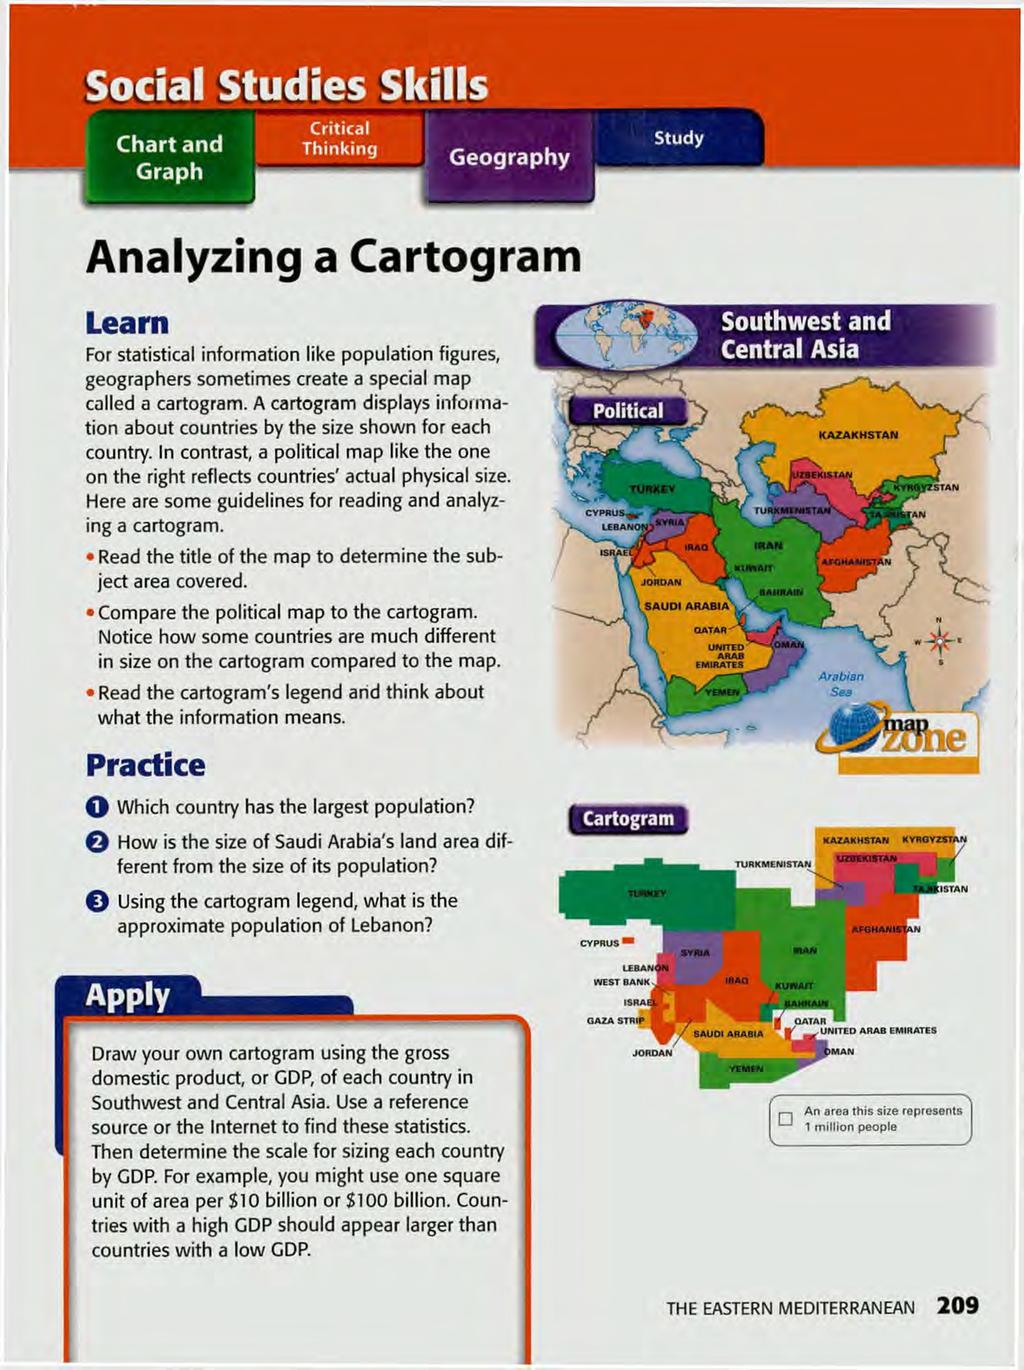 Social Studies Skills C hart an d G raph Critical Thinking G eo g ra p h y Study Analyzing a Cartogram Learn For statistical information like population figures, geographers sometimes create a